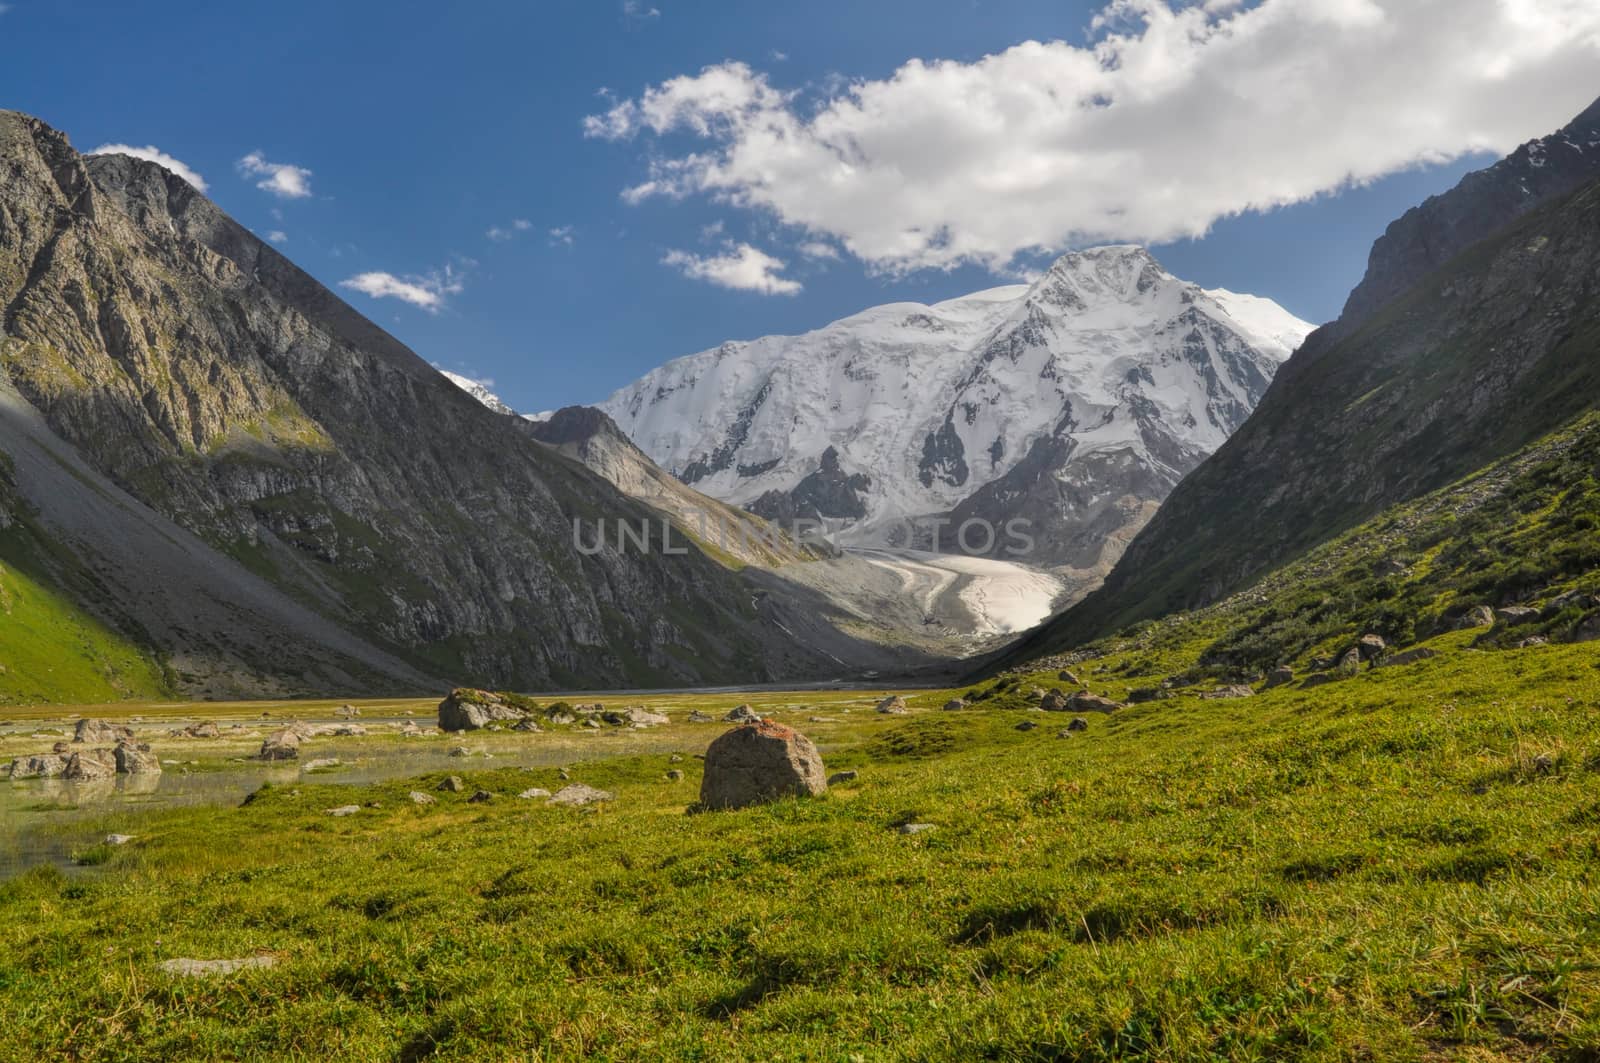 Grassy rocks lying in the valley under snow-covered Tien-Shan Mountains, Kyrgyzstan